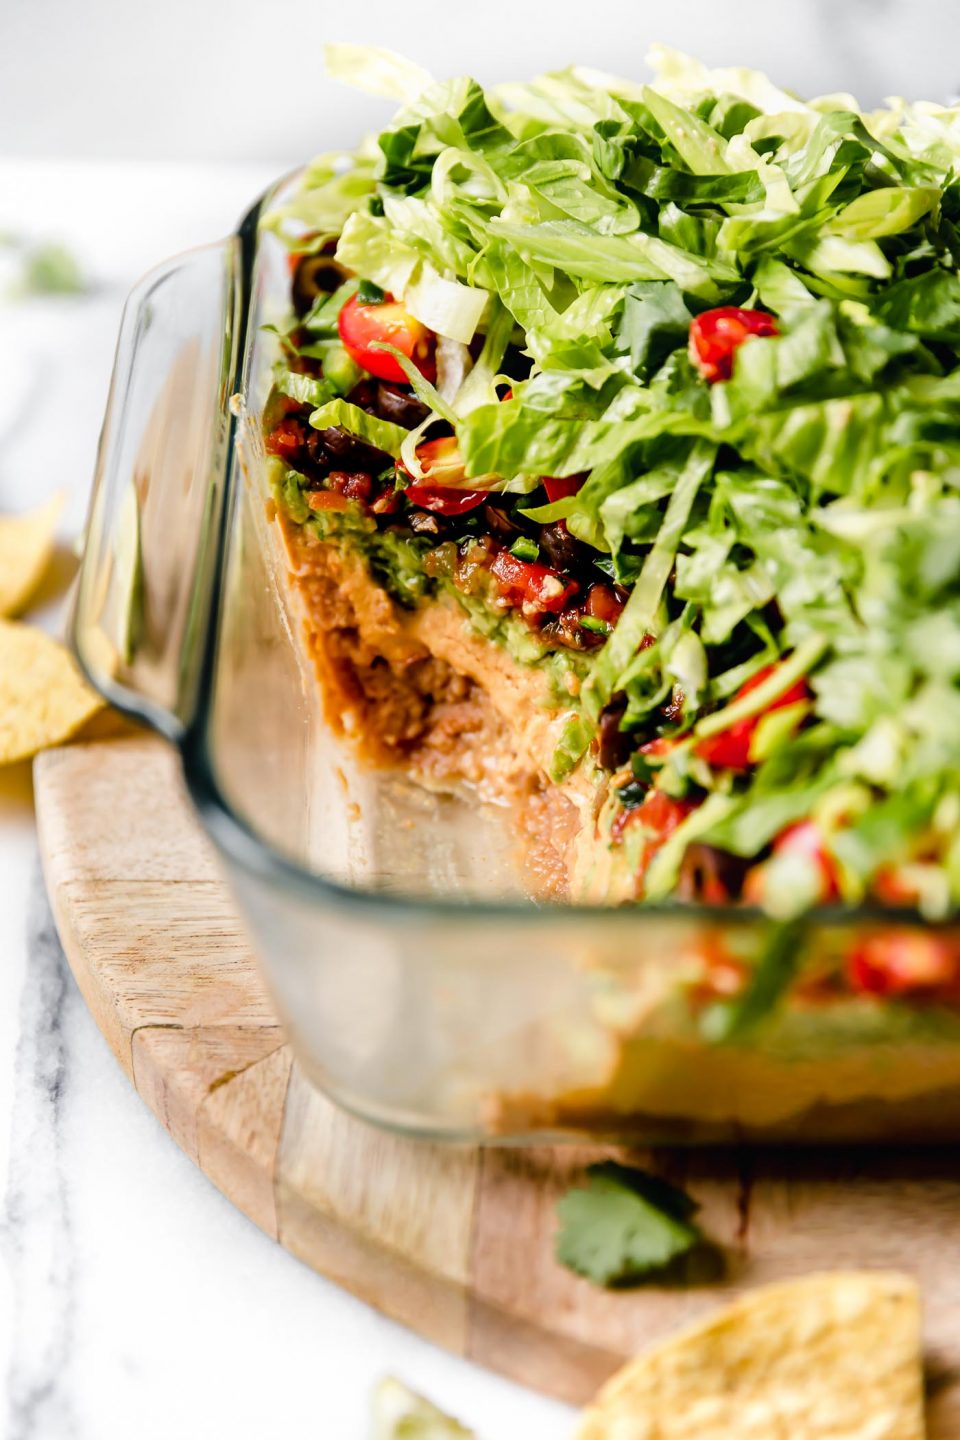 Straight-on photo of this vegan 7-Layer Dip recipe shown in clear Pyrex DEEP baking dish. The dish is sitting on a light wood board, with some of the dip removed from the container.